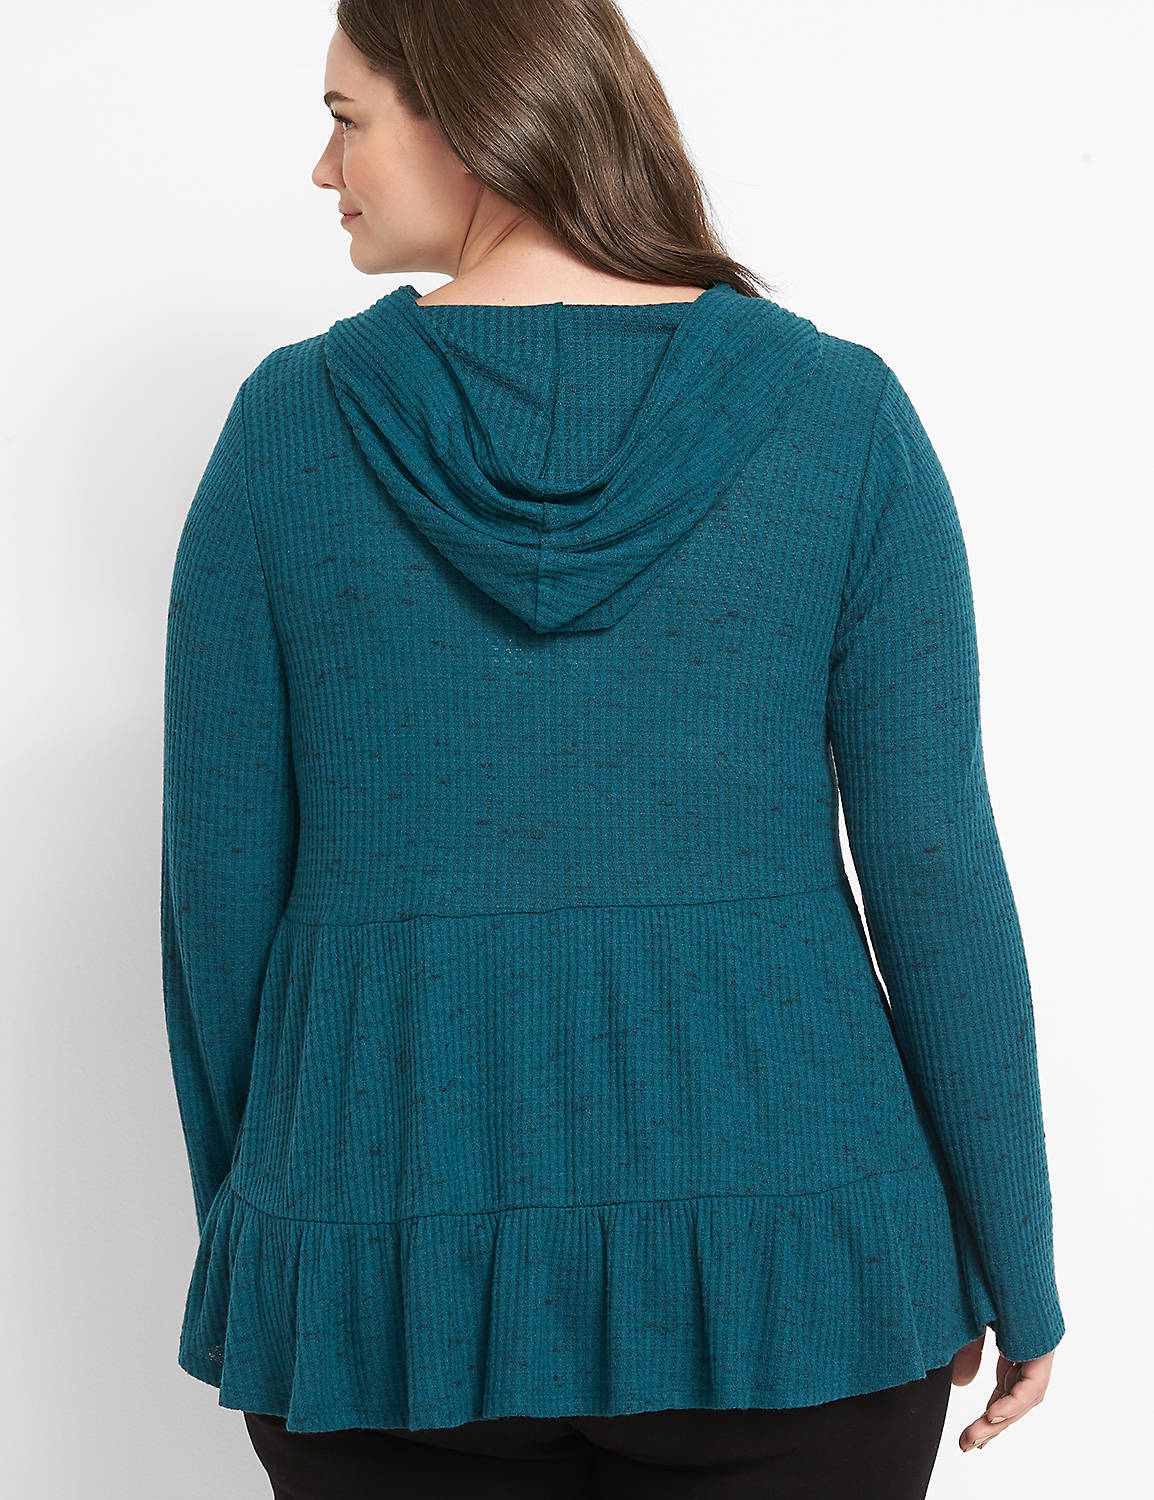 Long Sleeve Hooded Tiered Tunic Knit Top In Waffle Fabric 1123635:PANTONE Deep Teal:10/12 Product Image 2